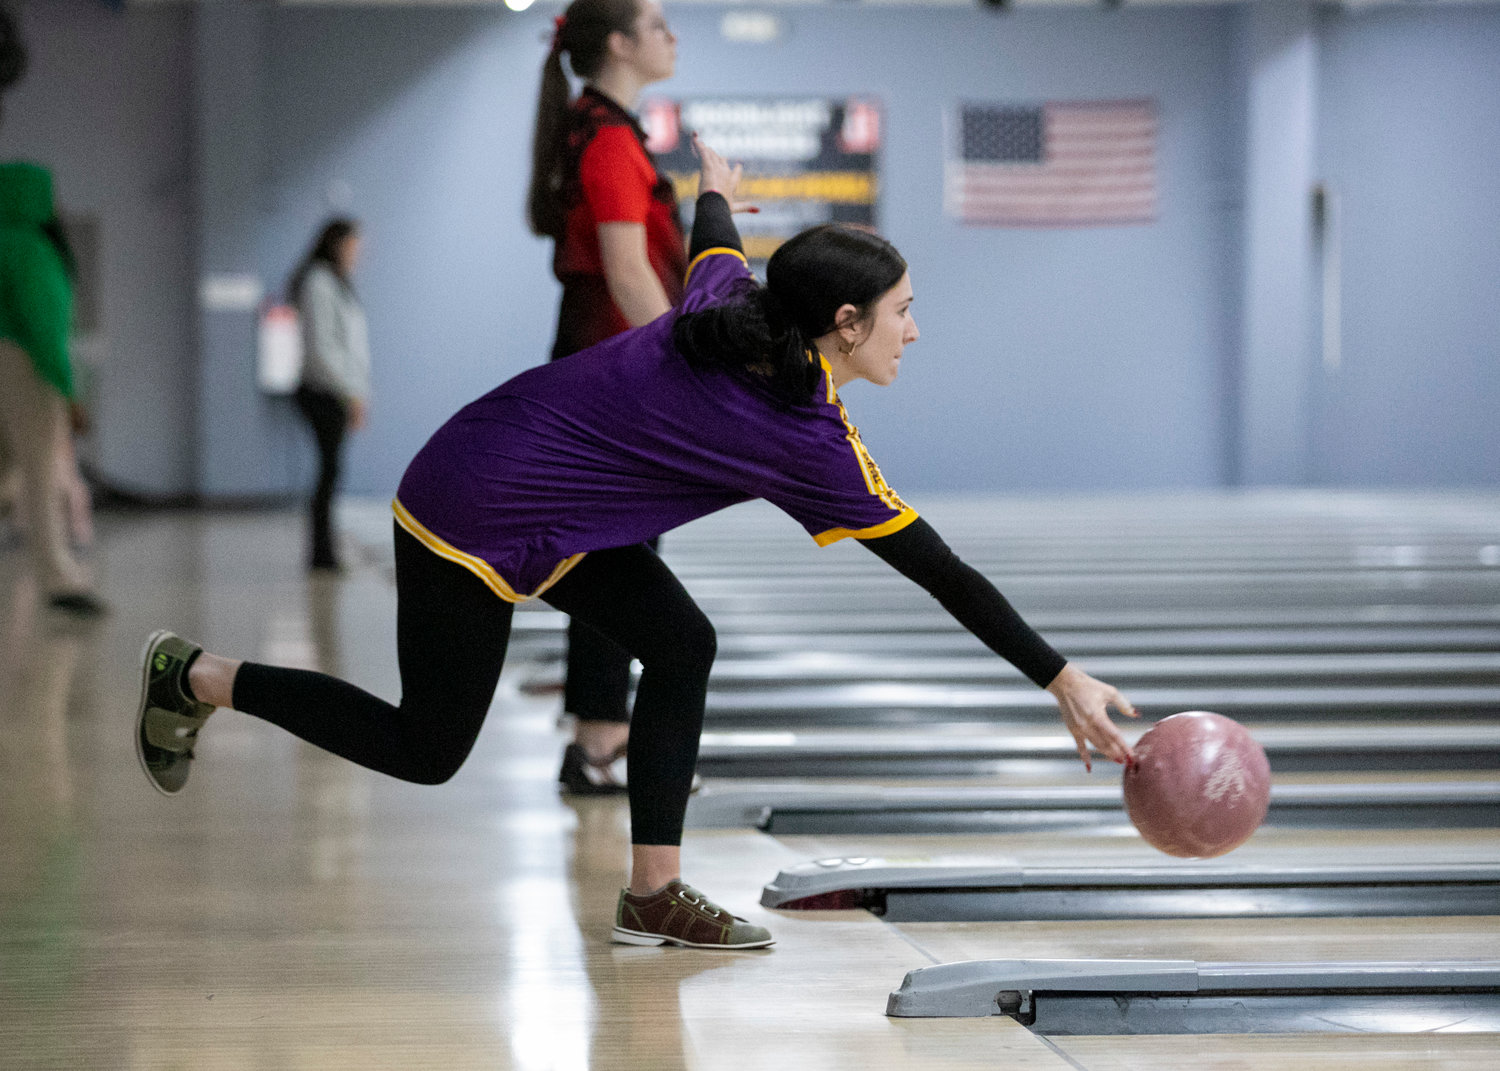 Daphne senior Jaidyn Graf releases a shot during competition at Eastern Shore Lanes Thursday, Jan. 19, in the qualifying round of the AHSAA South Regional bowling championship. Graf helped the Trojans finish fifth with tomorrow’s single-elimination tournament on deck.